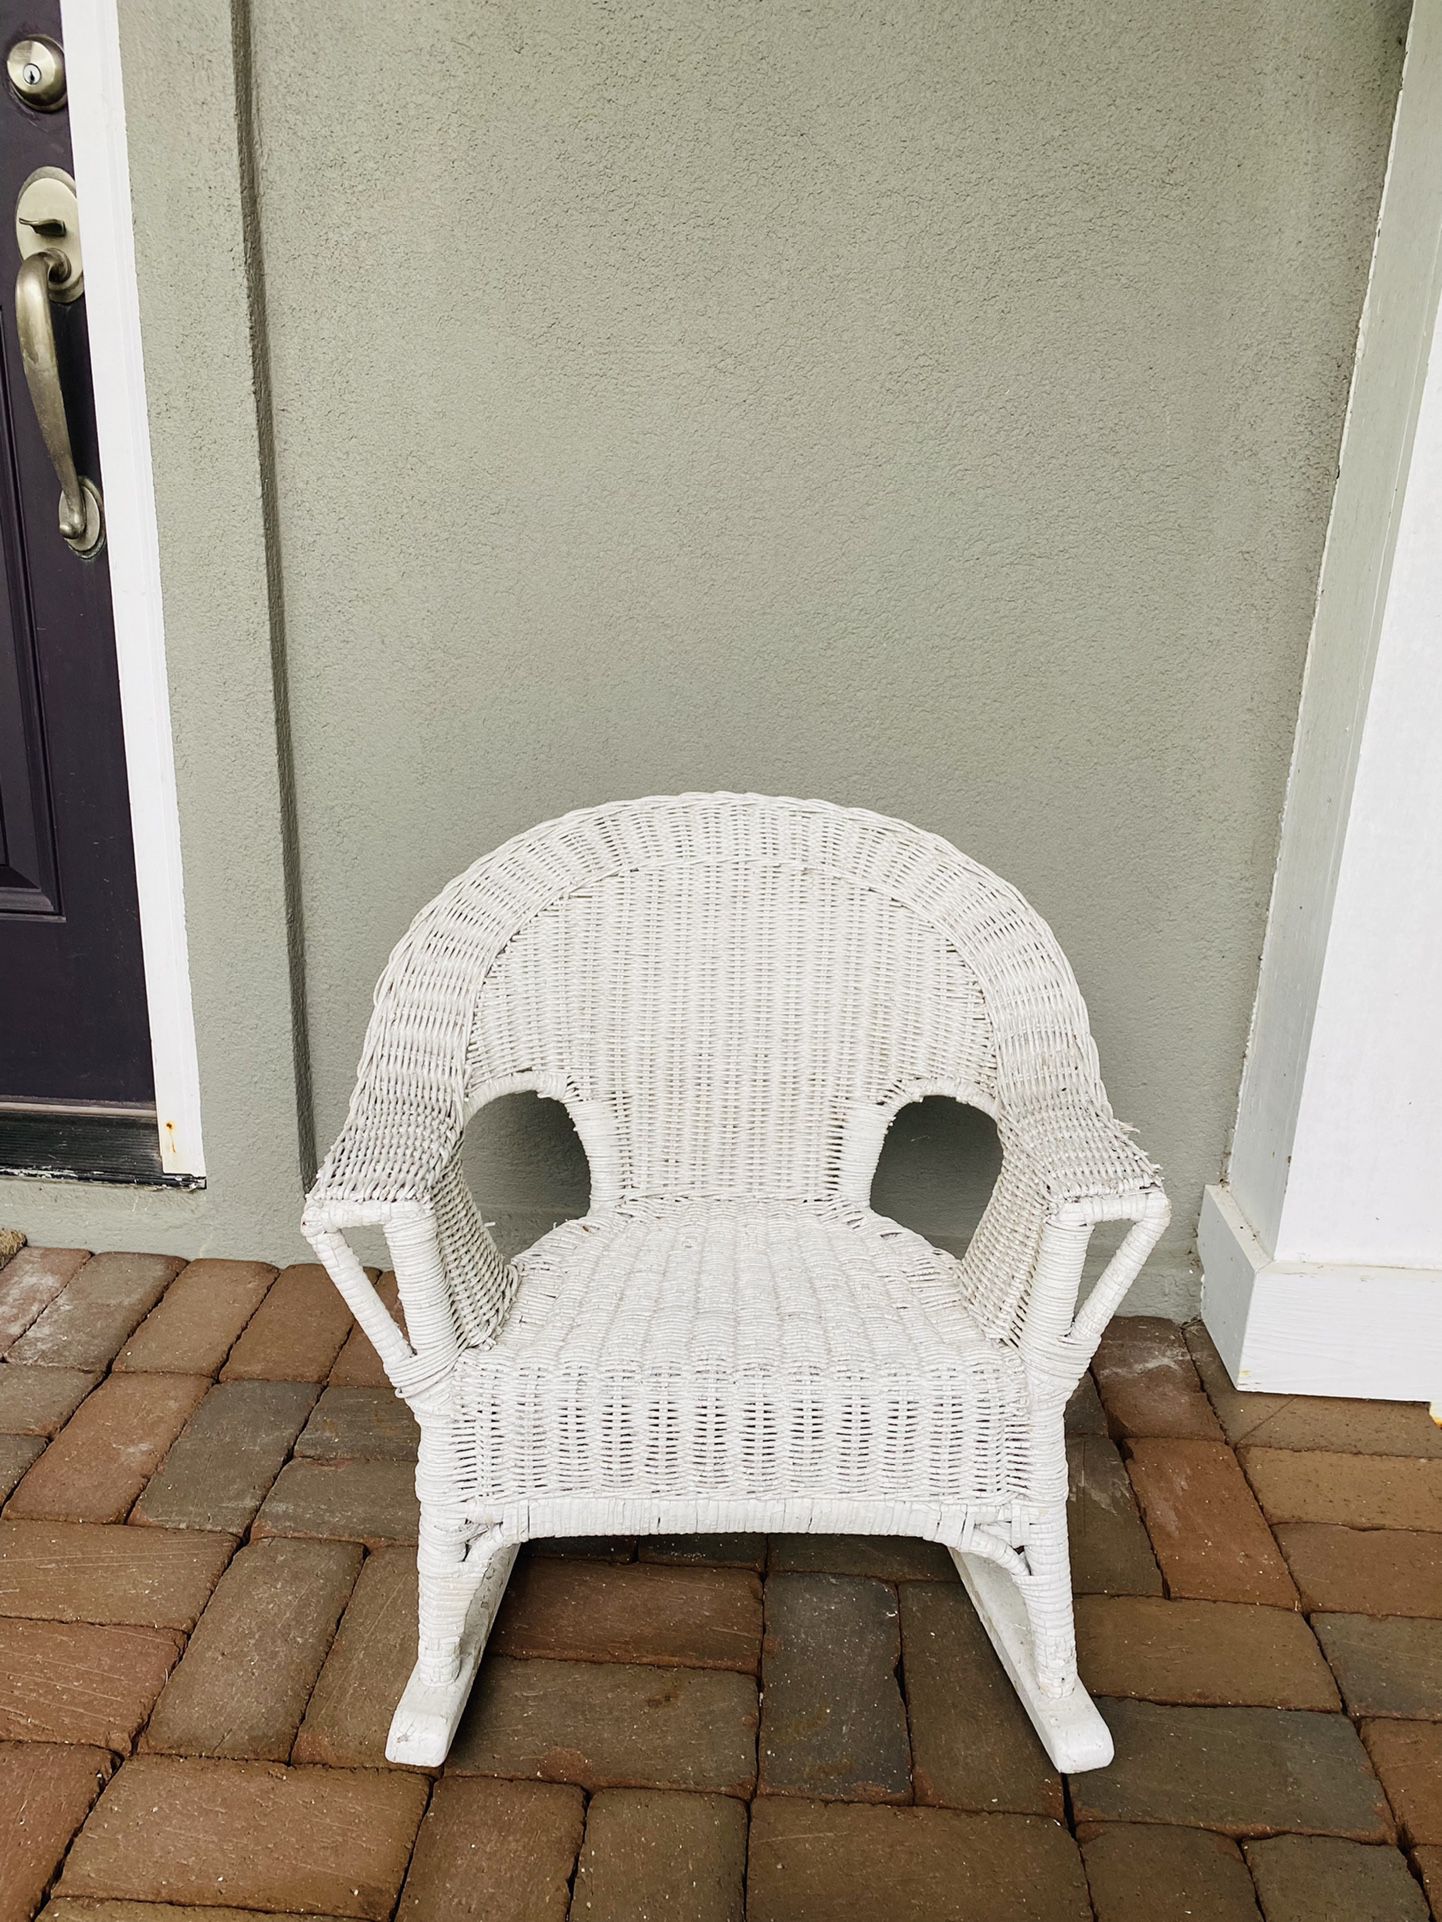 White Wicker Baby Chair (1.5 foot height)